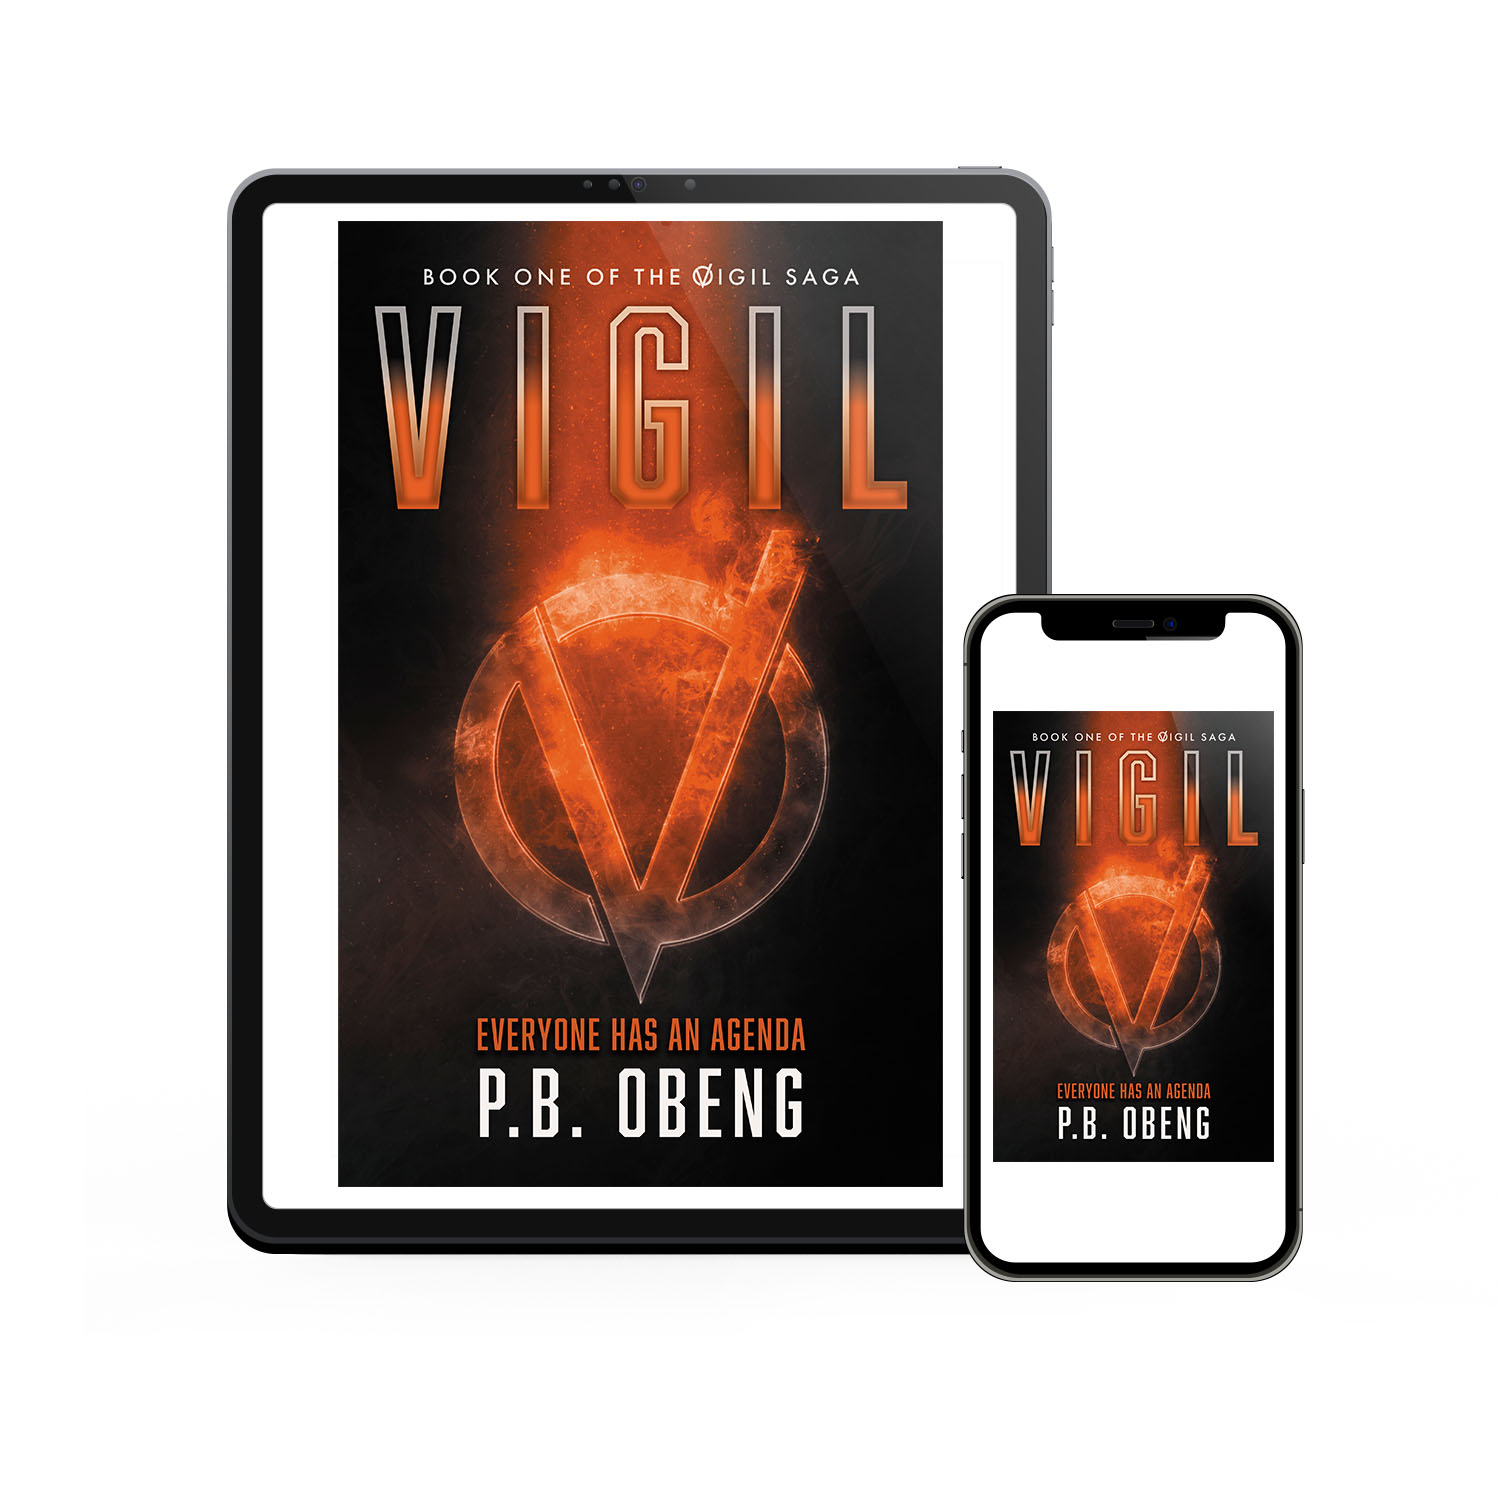 The 'Vigil' Saga is super-powered superhero scifi adventure series by PB Obeng. The book cover and interiors were designed by Mark Thomas of coverness.com. To find out more about my book design services, please visit www.coverness.com